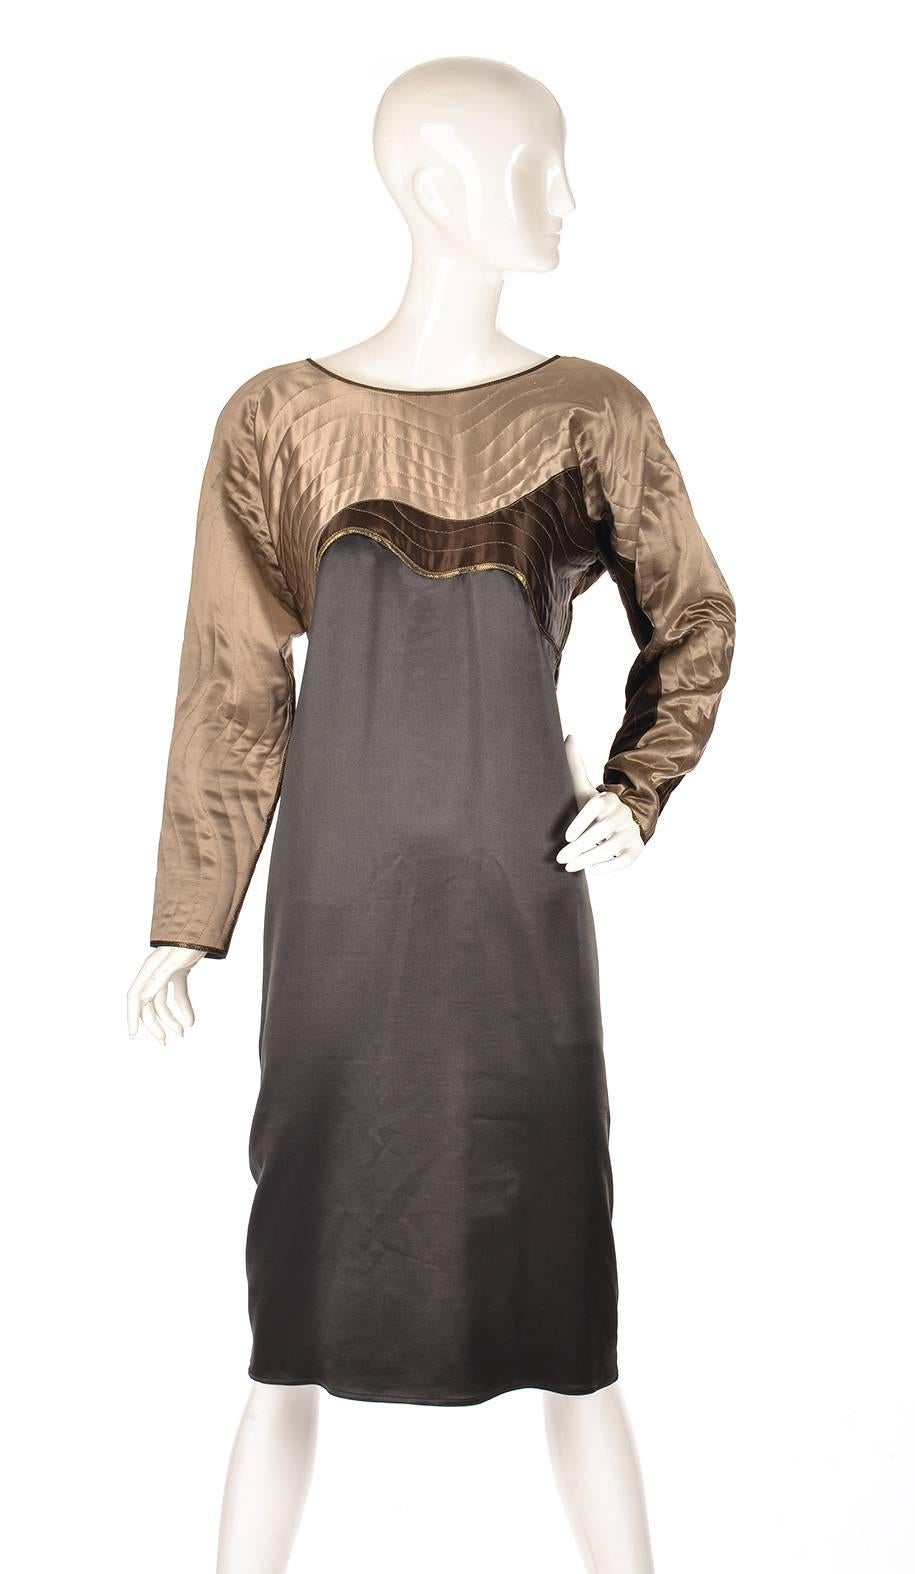 
This late 20th century shift dress by Bergdorf Goodman is absolutely luminous. The dress features a gold-stitched quilted abstract wave design in pale gold and chocolate fabric over a deep black satin. The neck, sleeves, and bottom of bust are